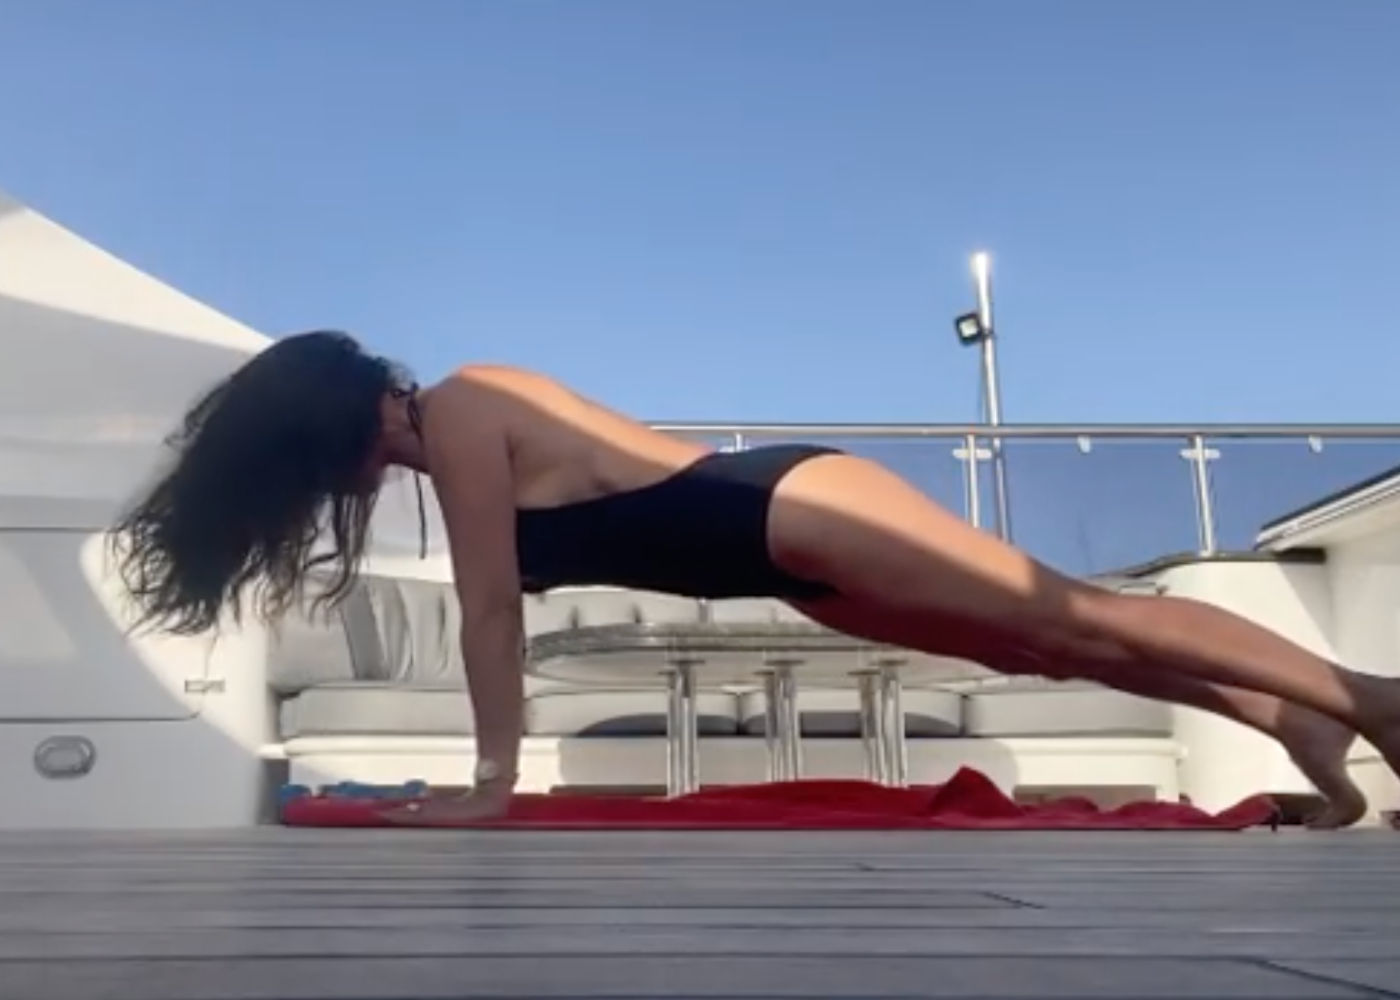 Catherine Zeta-Jones, 51, Shows Side-Boob In Backless Swimsuit While Doing Yoga On A Boat